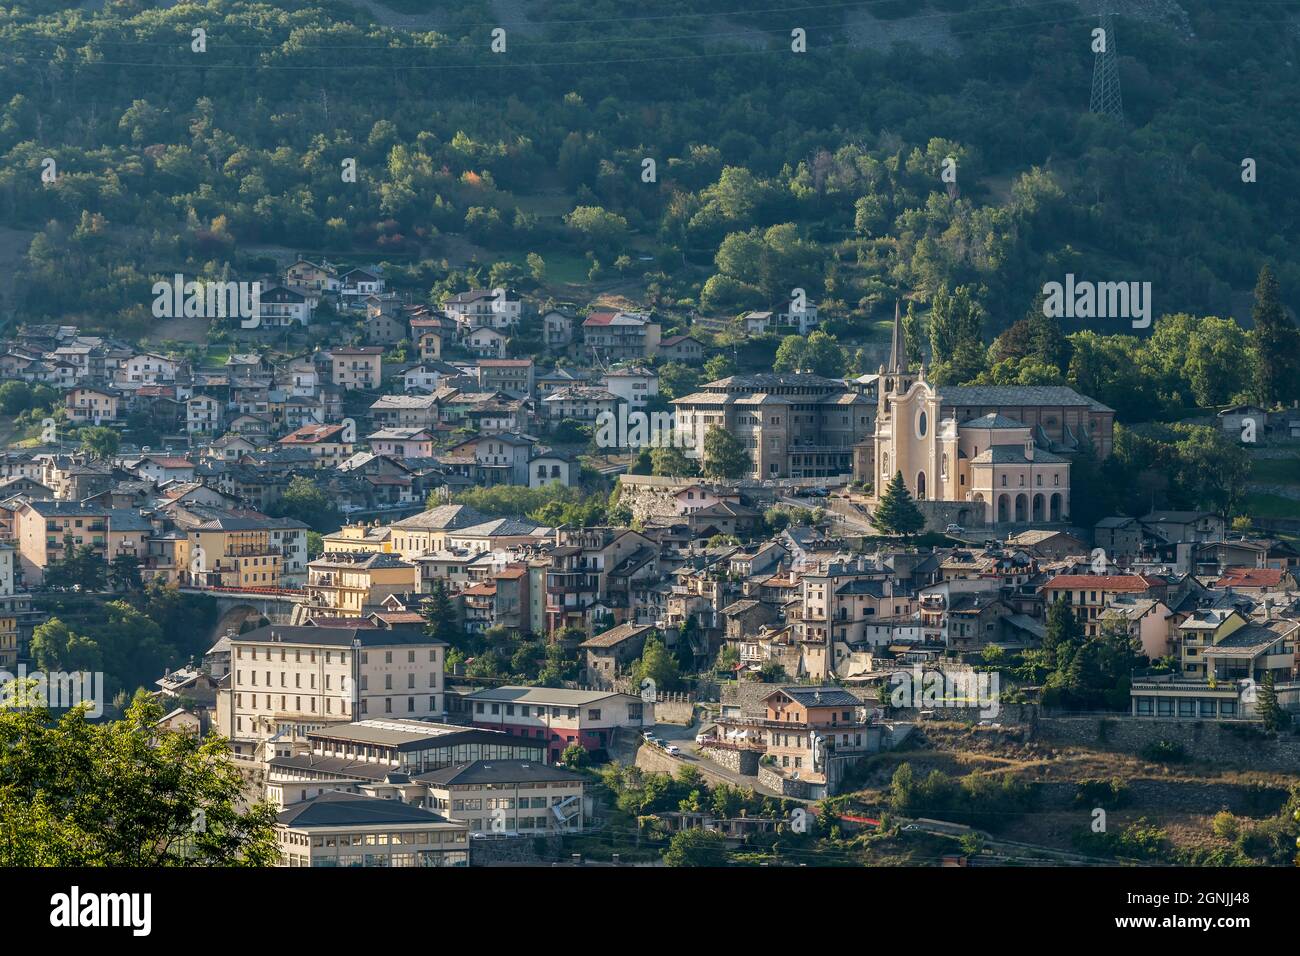 Beautiful aerial view of the historic center of Chatillon, Valle d'Aosta, Italy Stock Photo